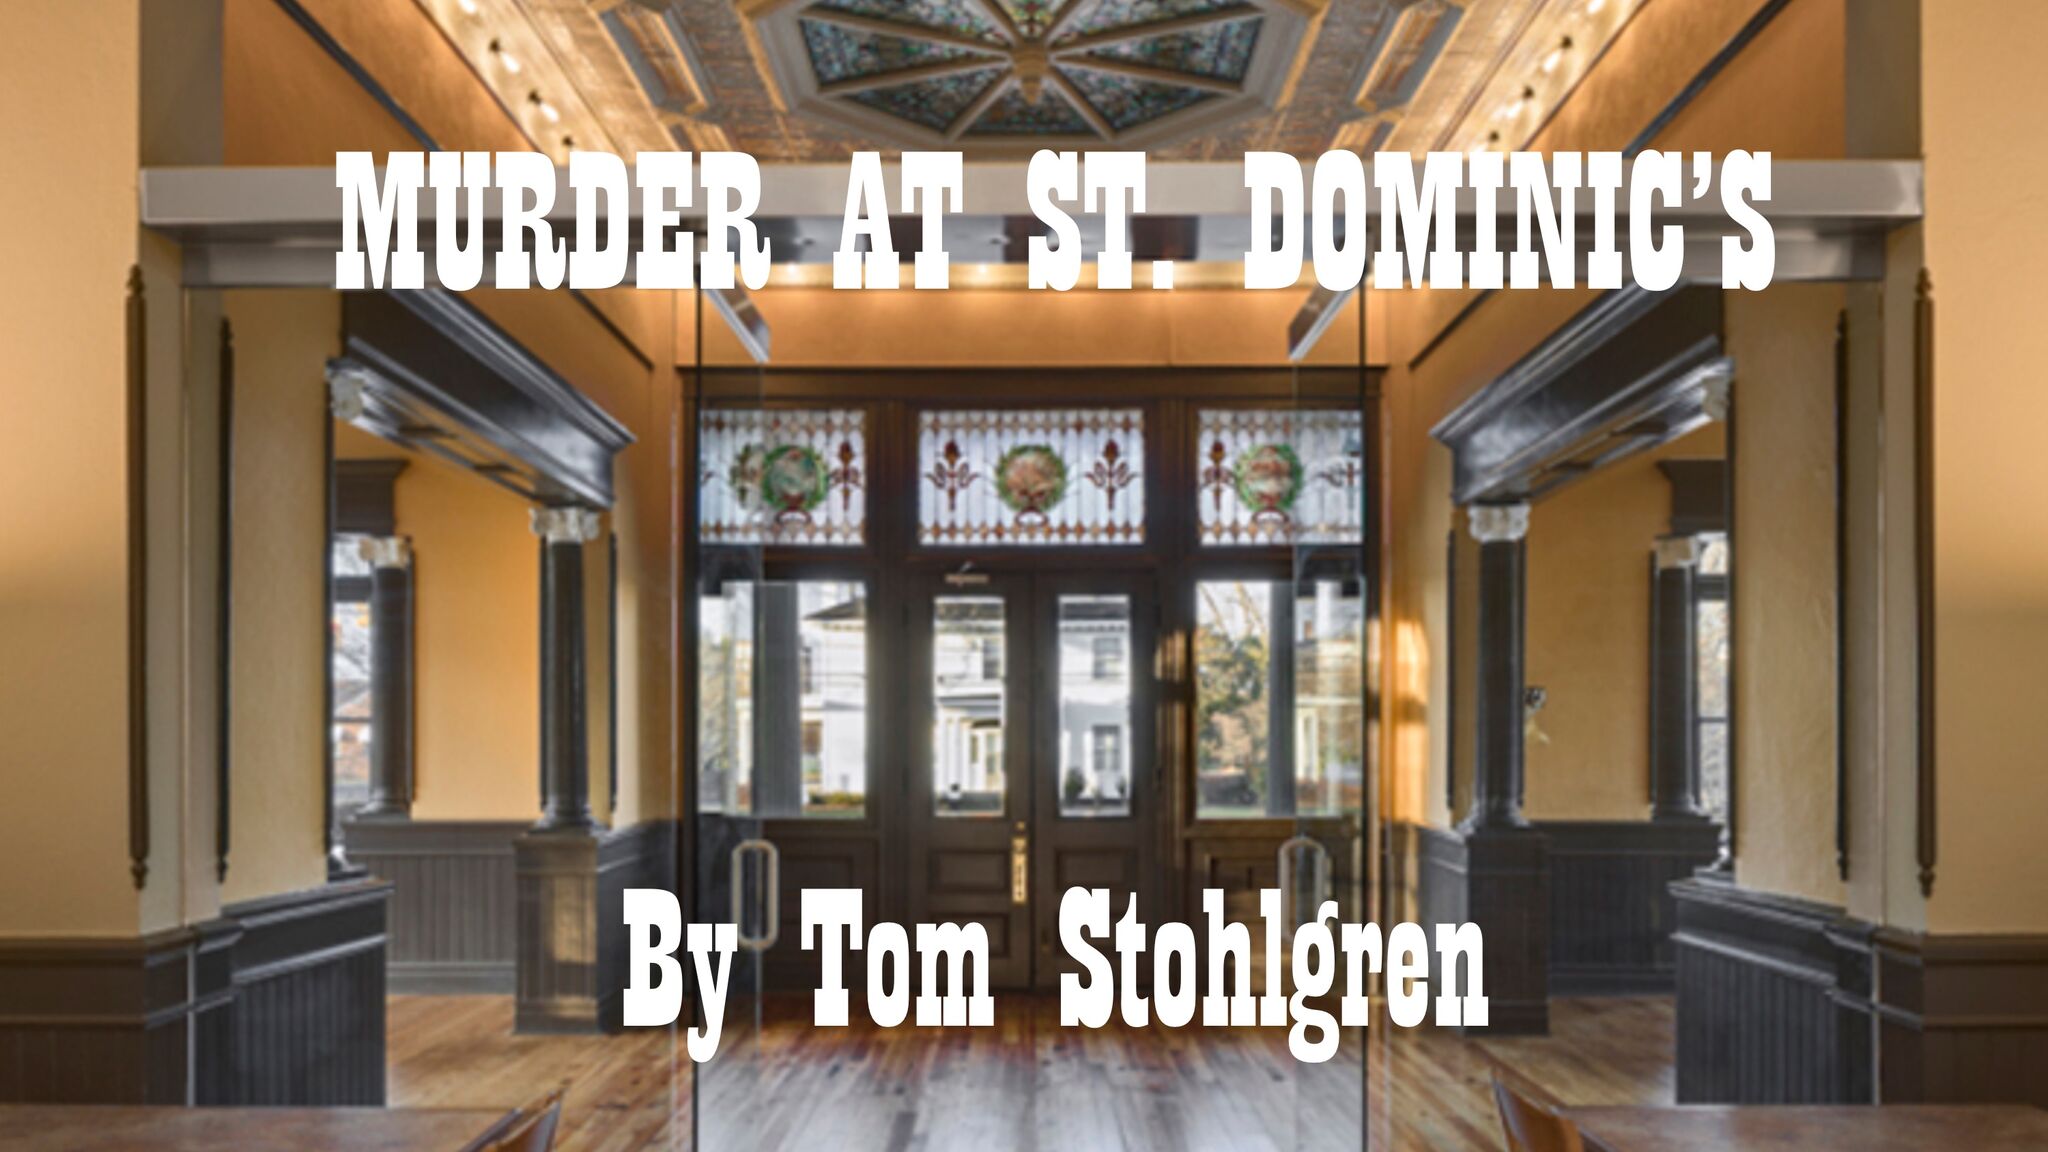 MURDER AT ST. DOMINIC'S